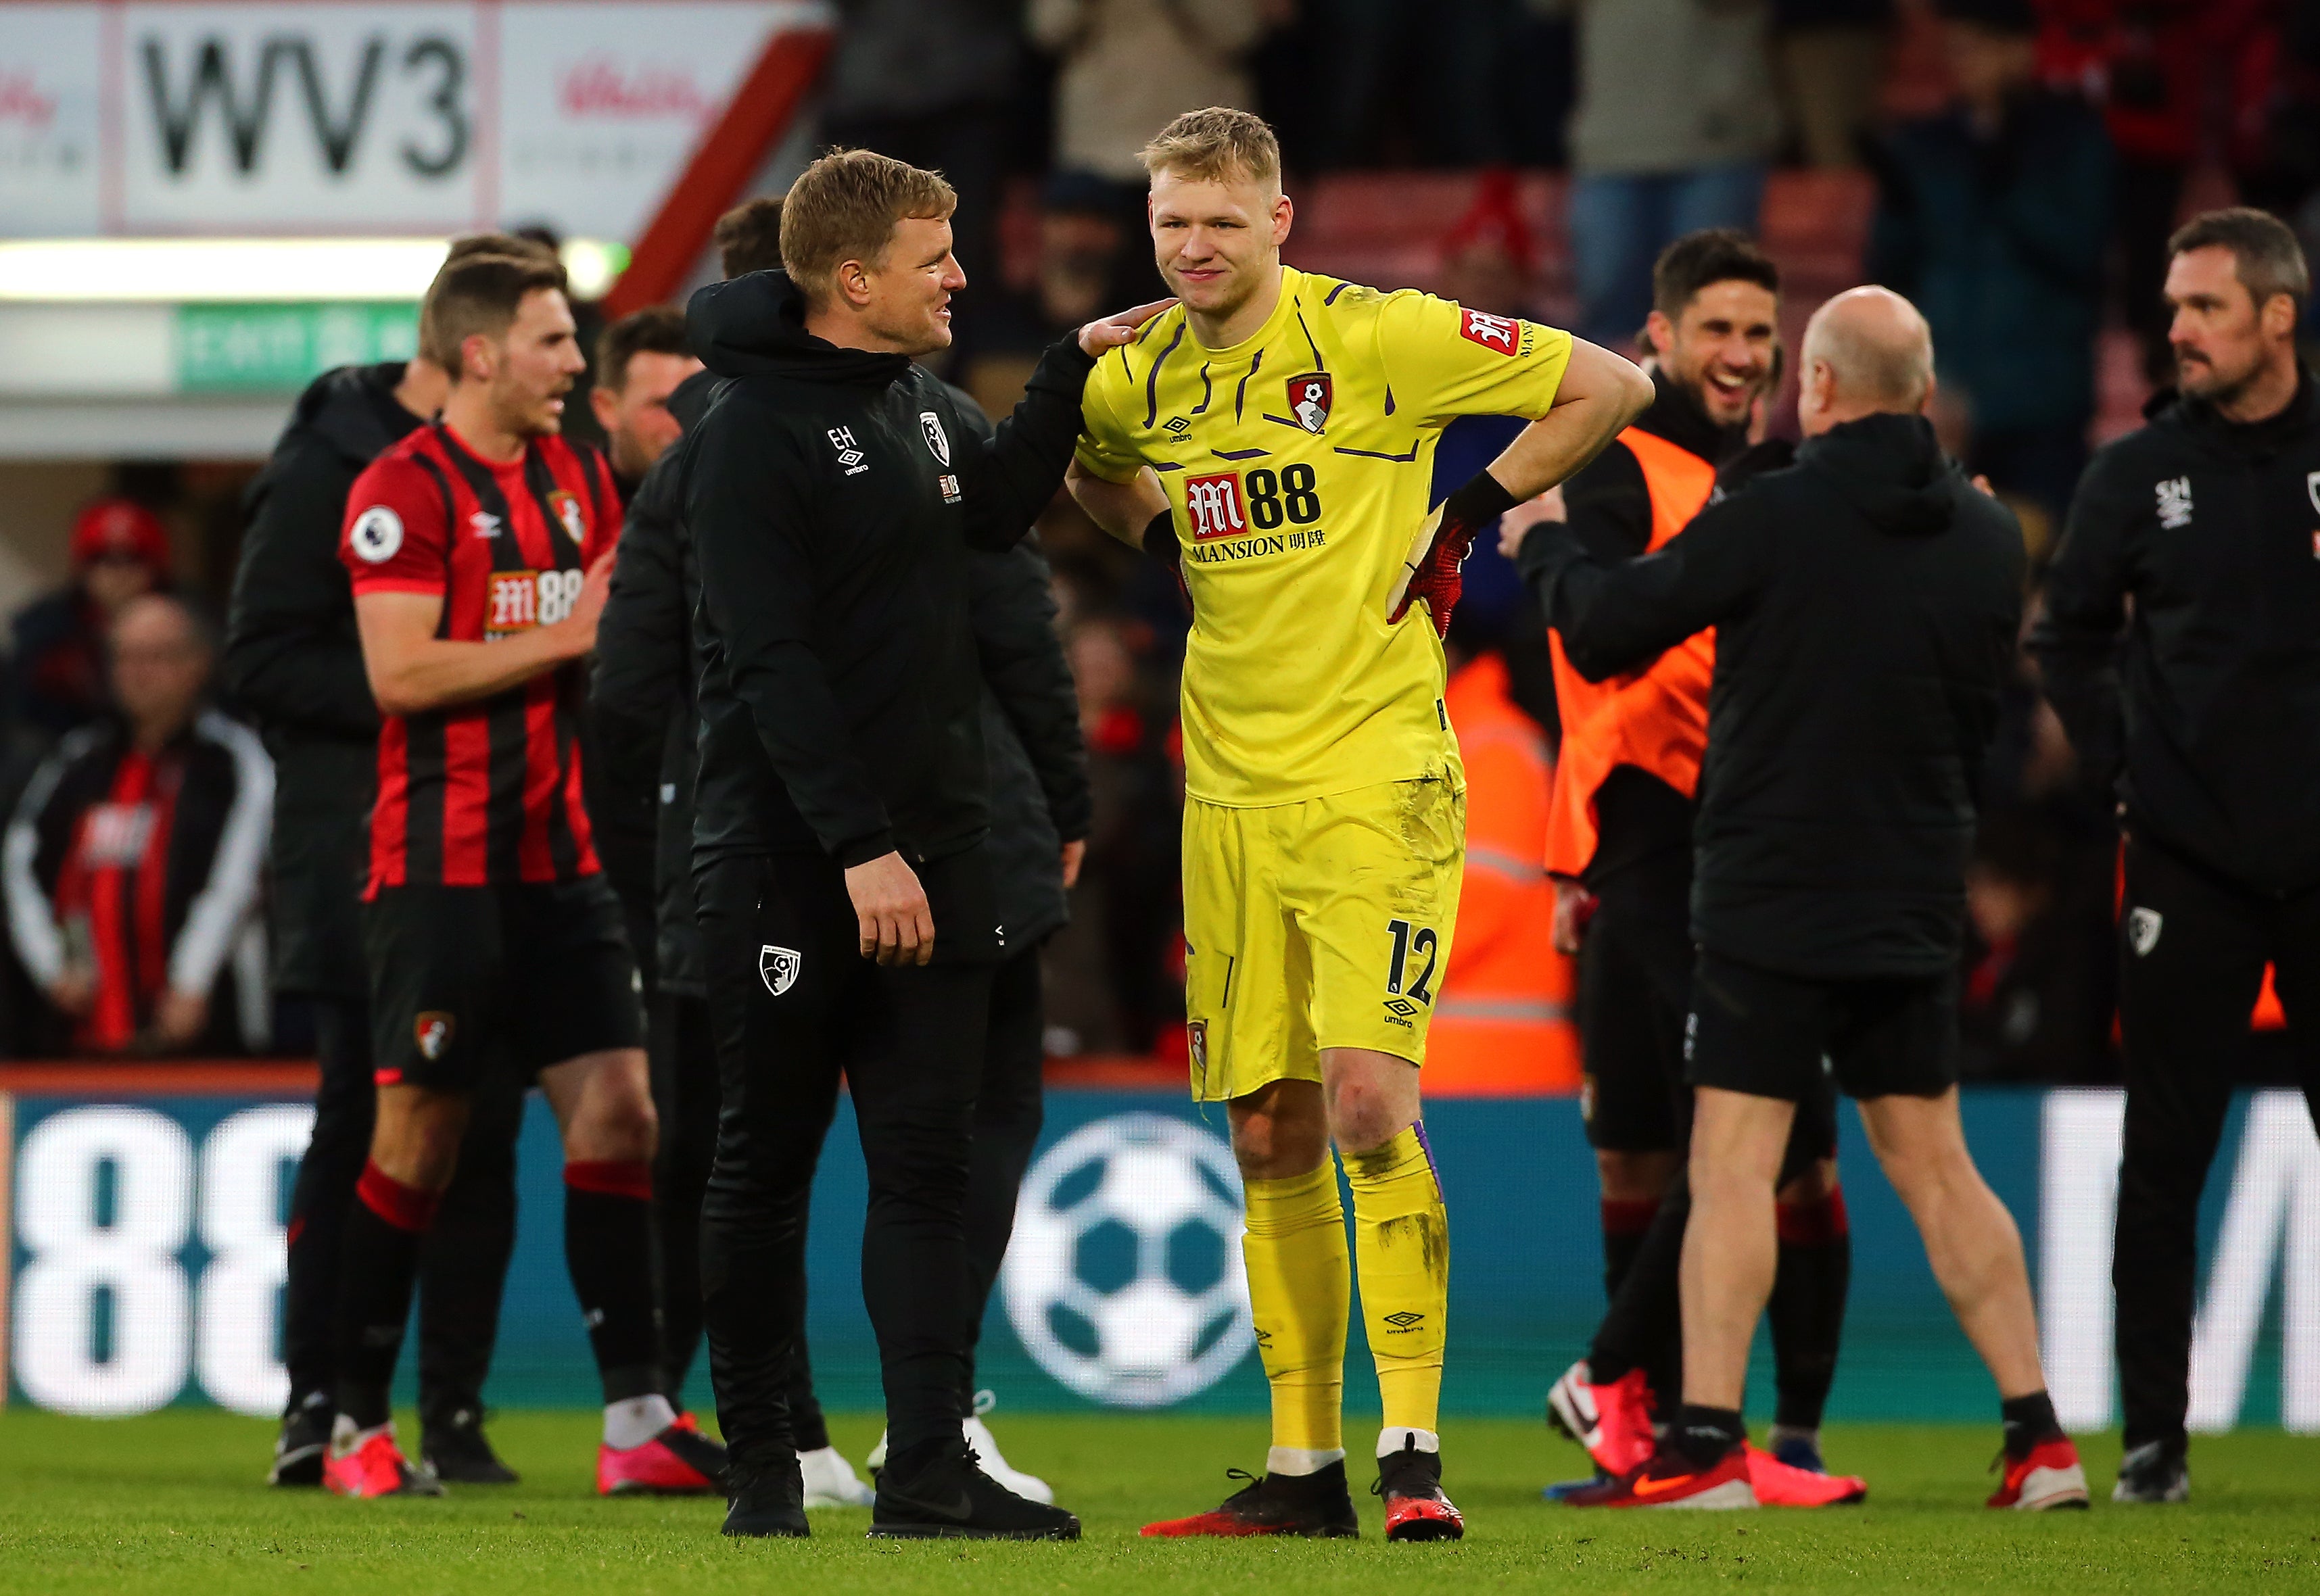 Ramsdale credits an incident at Bournemouth under Eddie Howe as the catalyst for his career. (Mark Kerton/PA)